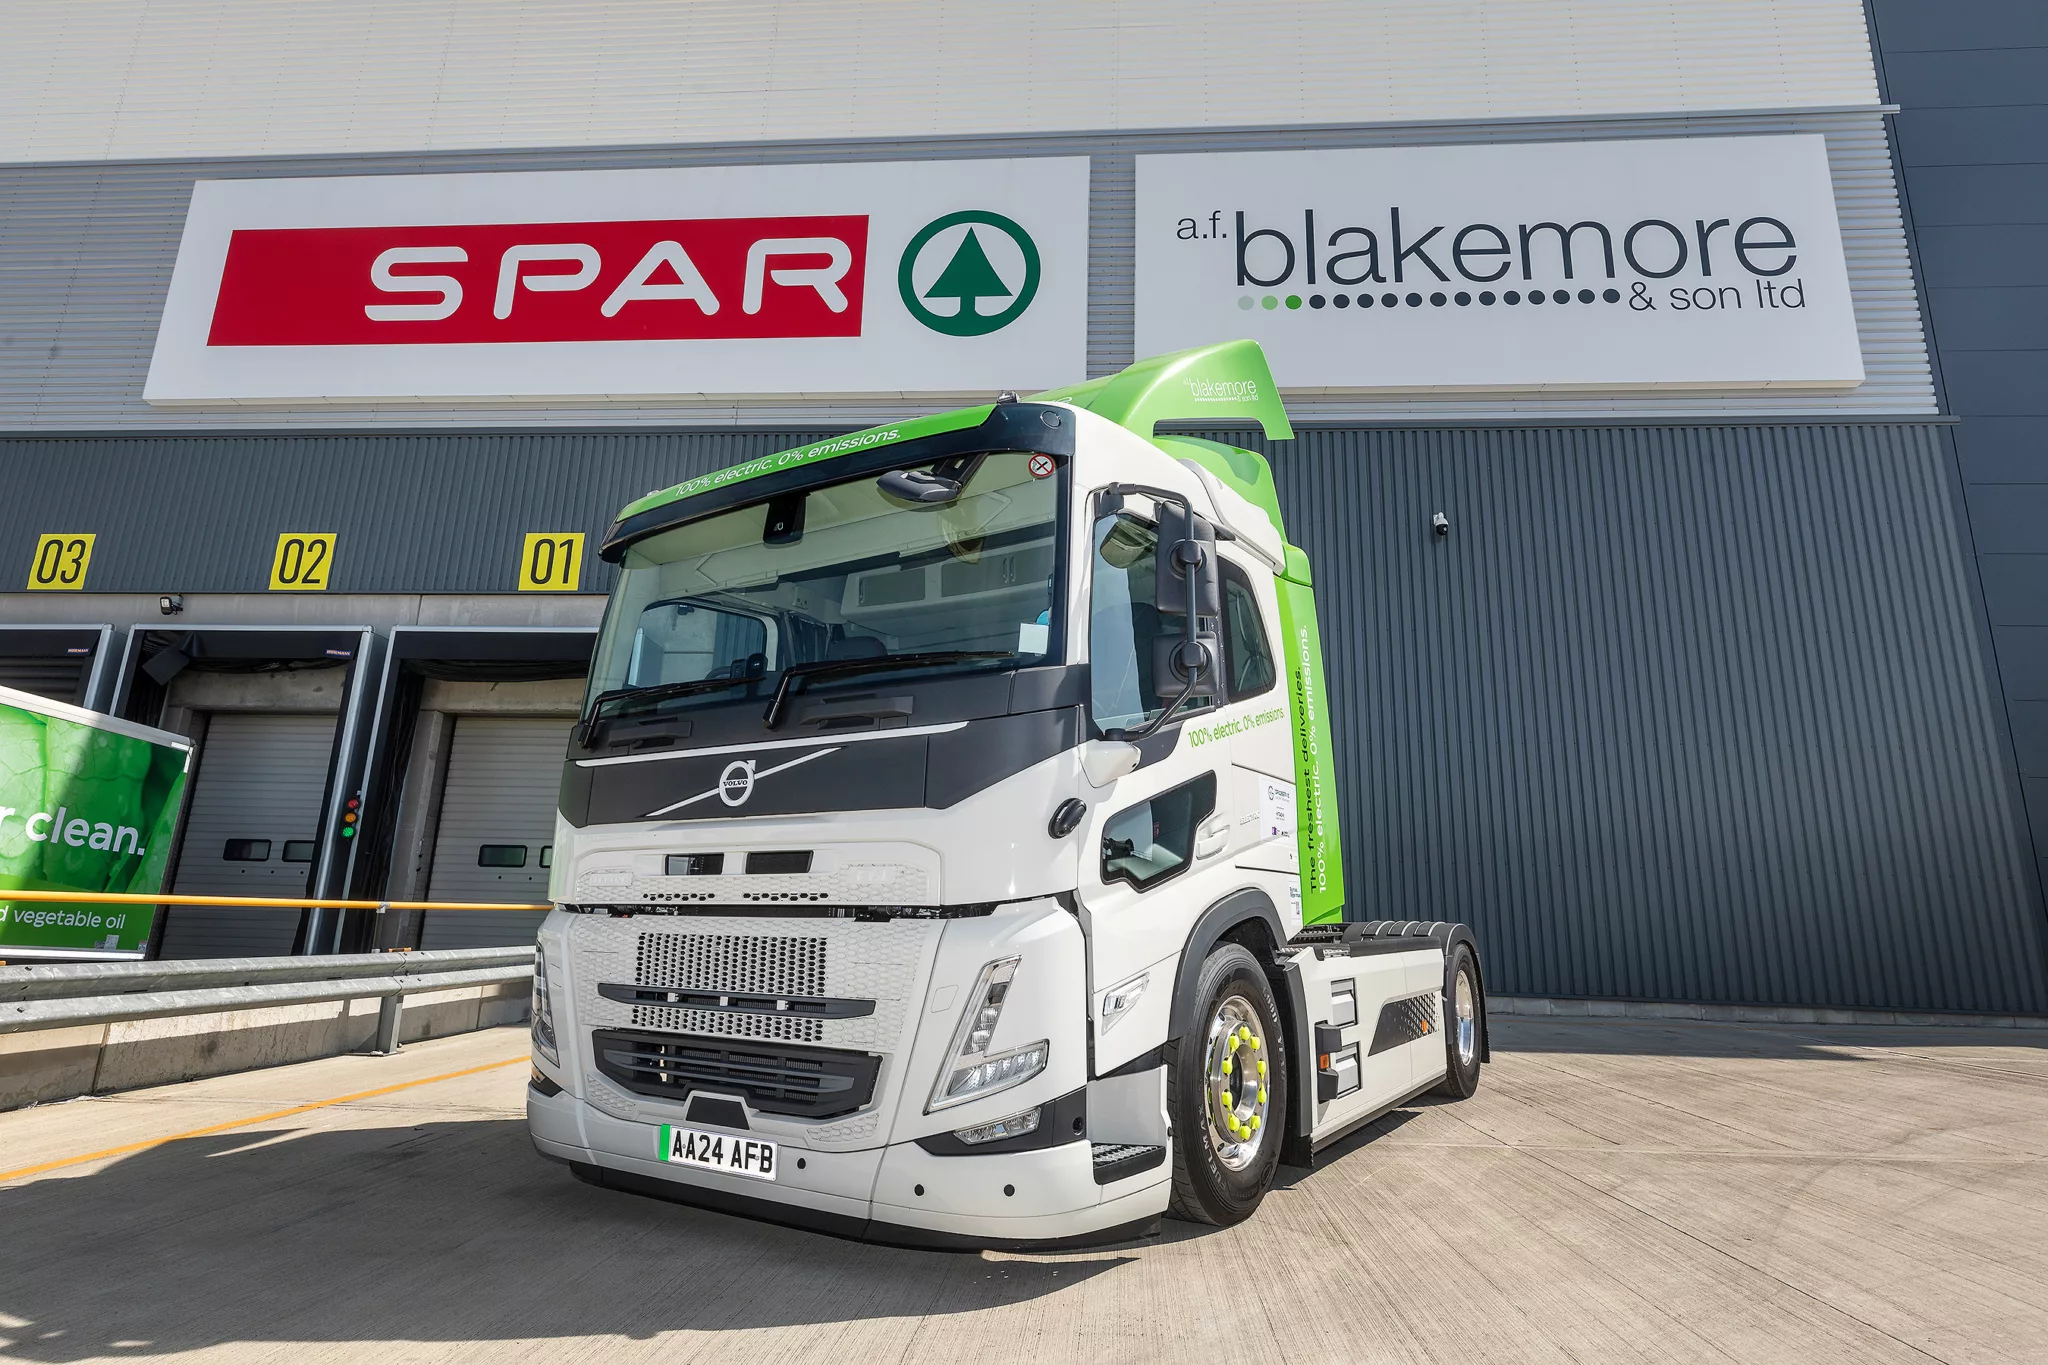 New electric truck delivered to AF Blakemore via teh Electric Freightway programme